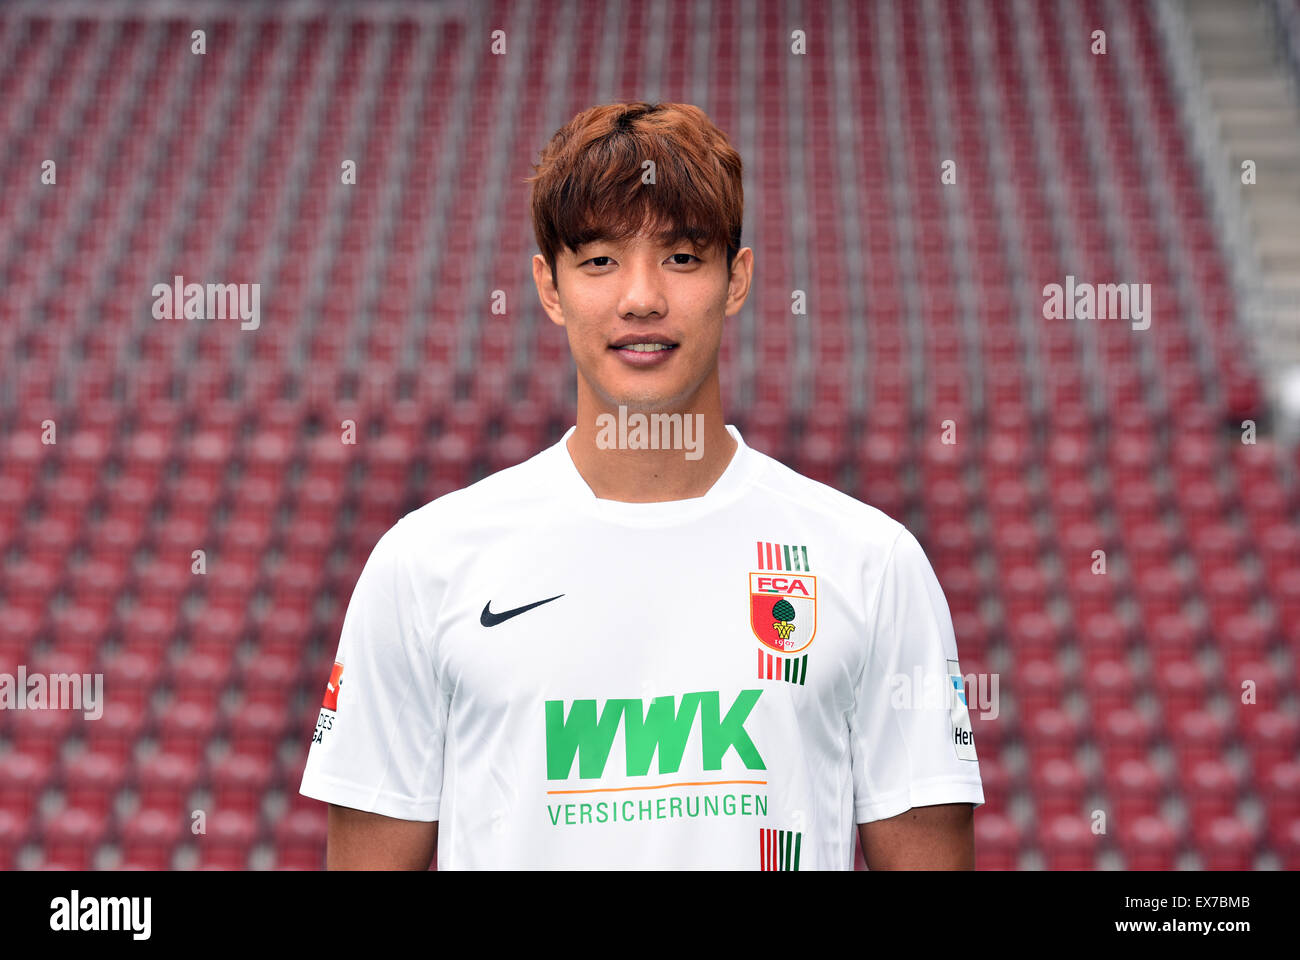 Augsberg, Germany. 8th July, 2015. German soccer Bundesliga: Team photos for FC Augsburg for the 2015/16 season in the WWK ARENA in Augsberg, Germany, 8 July 2015. Pictured here is player Jeong-Ho Hong. Photo: Stefan Puchner/dpa/Alamy Live News Stock Photo